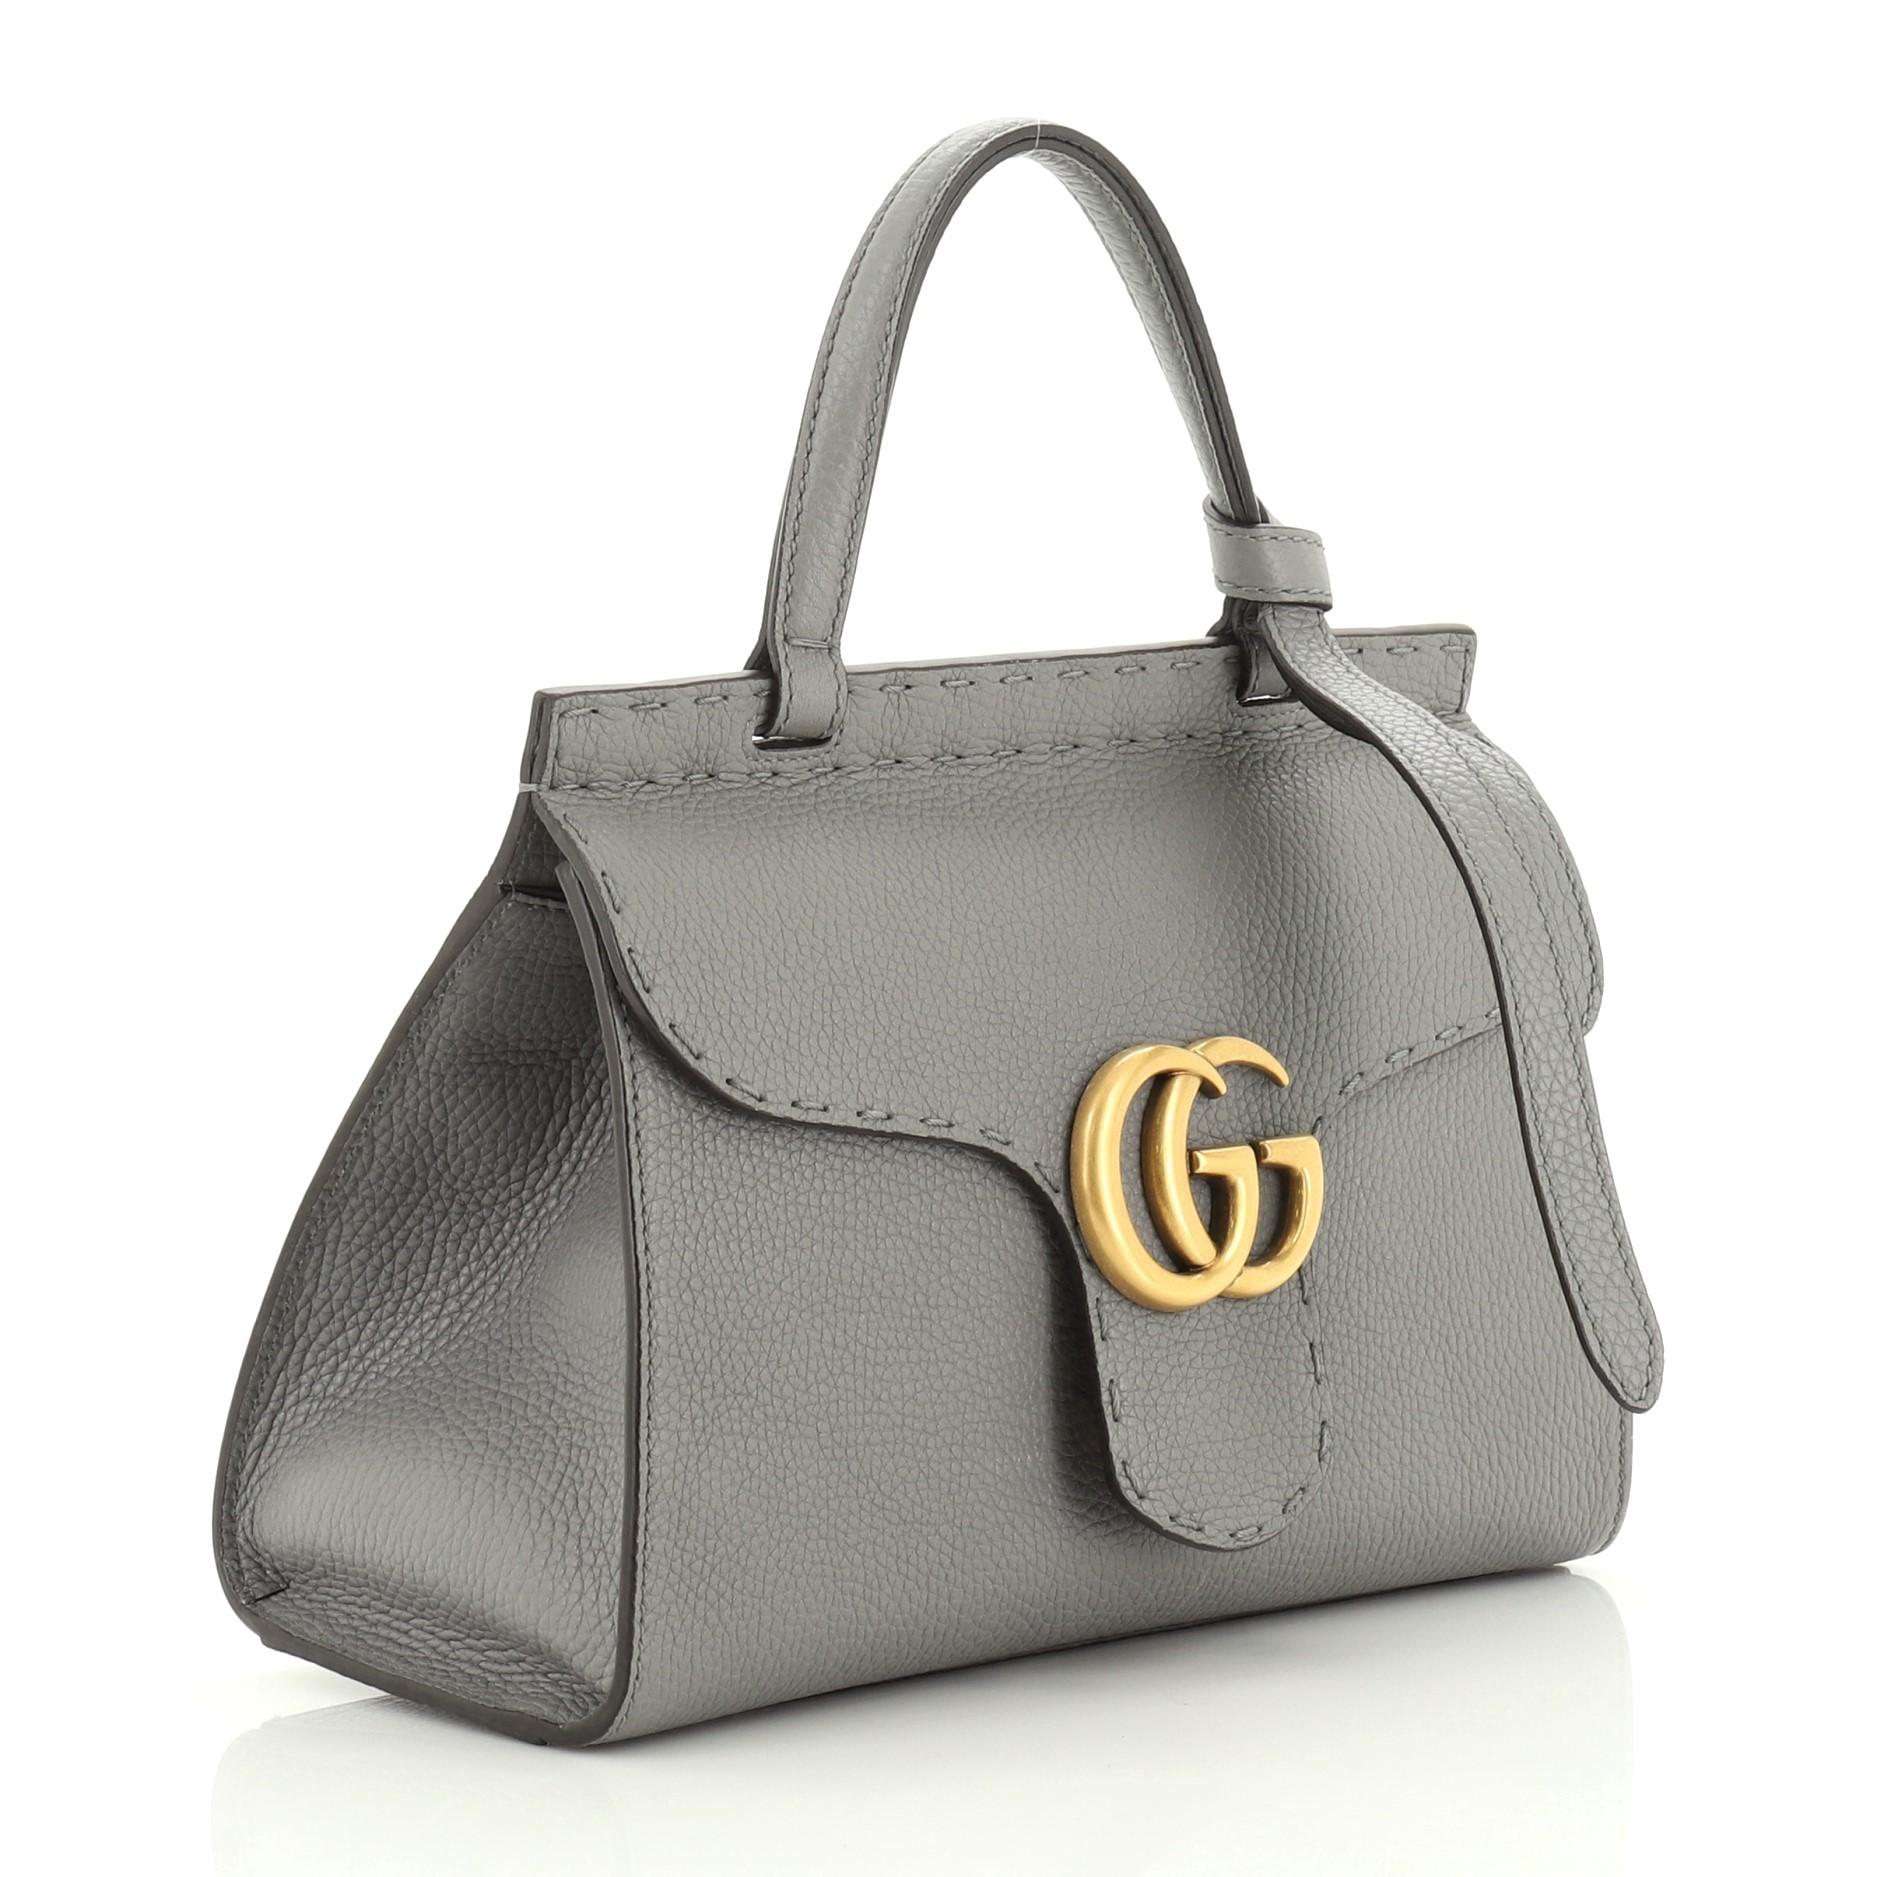 This Gucci GG Marmont Top Handle Bag Leather Mini, crafted from gray leather, features a flat leather handle, flap top with GG logo, and aged gold-tone hardware. Its push-lock closure opens to a neutral fabric interior with slip pocket. 

Condition: